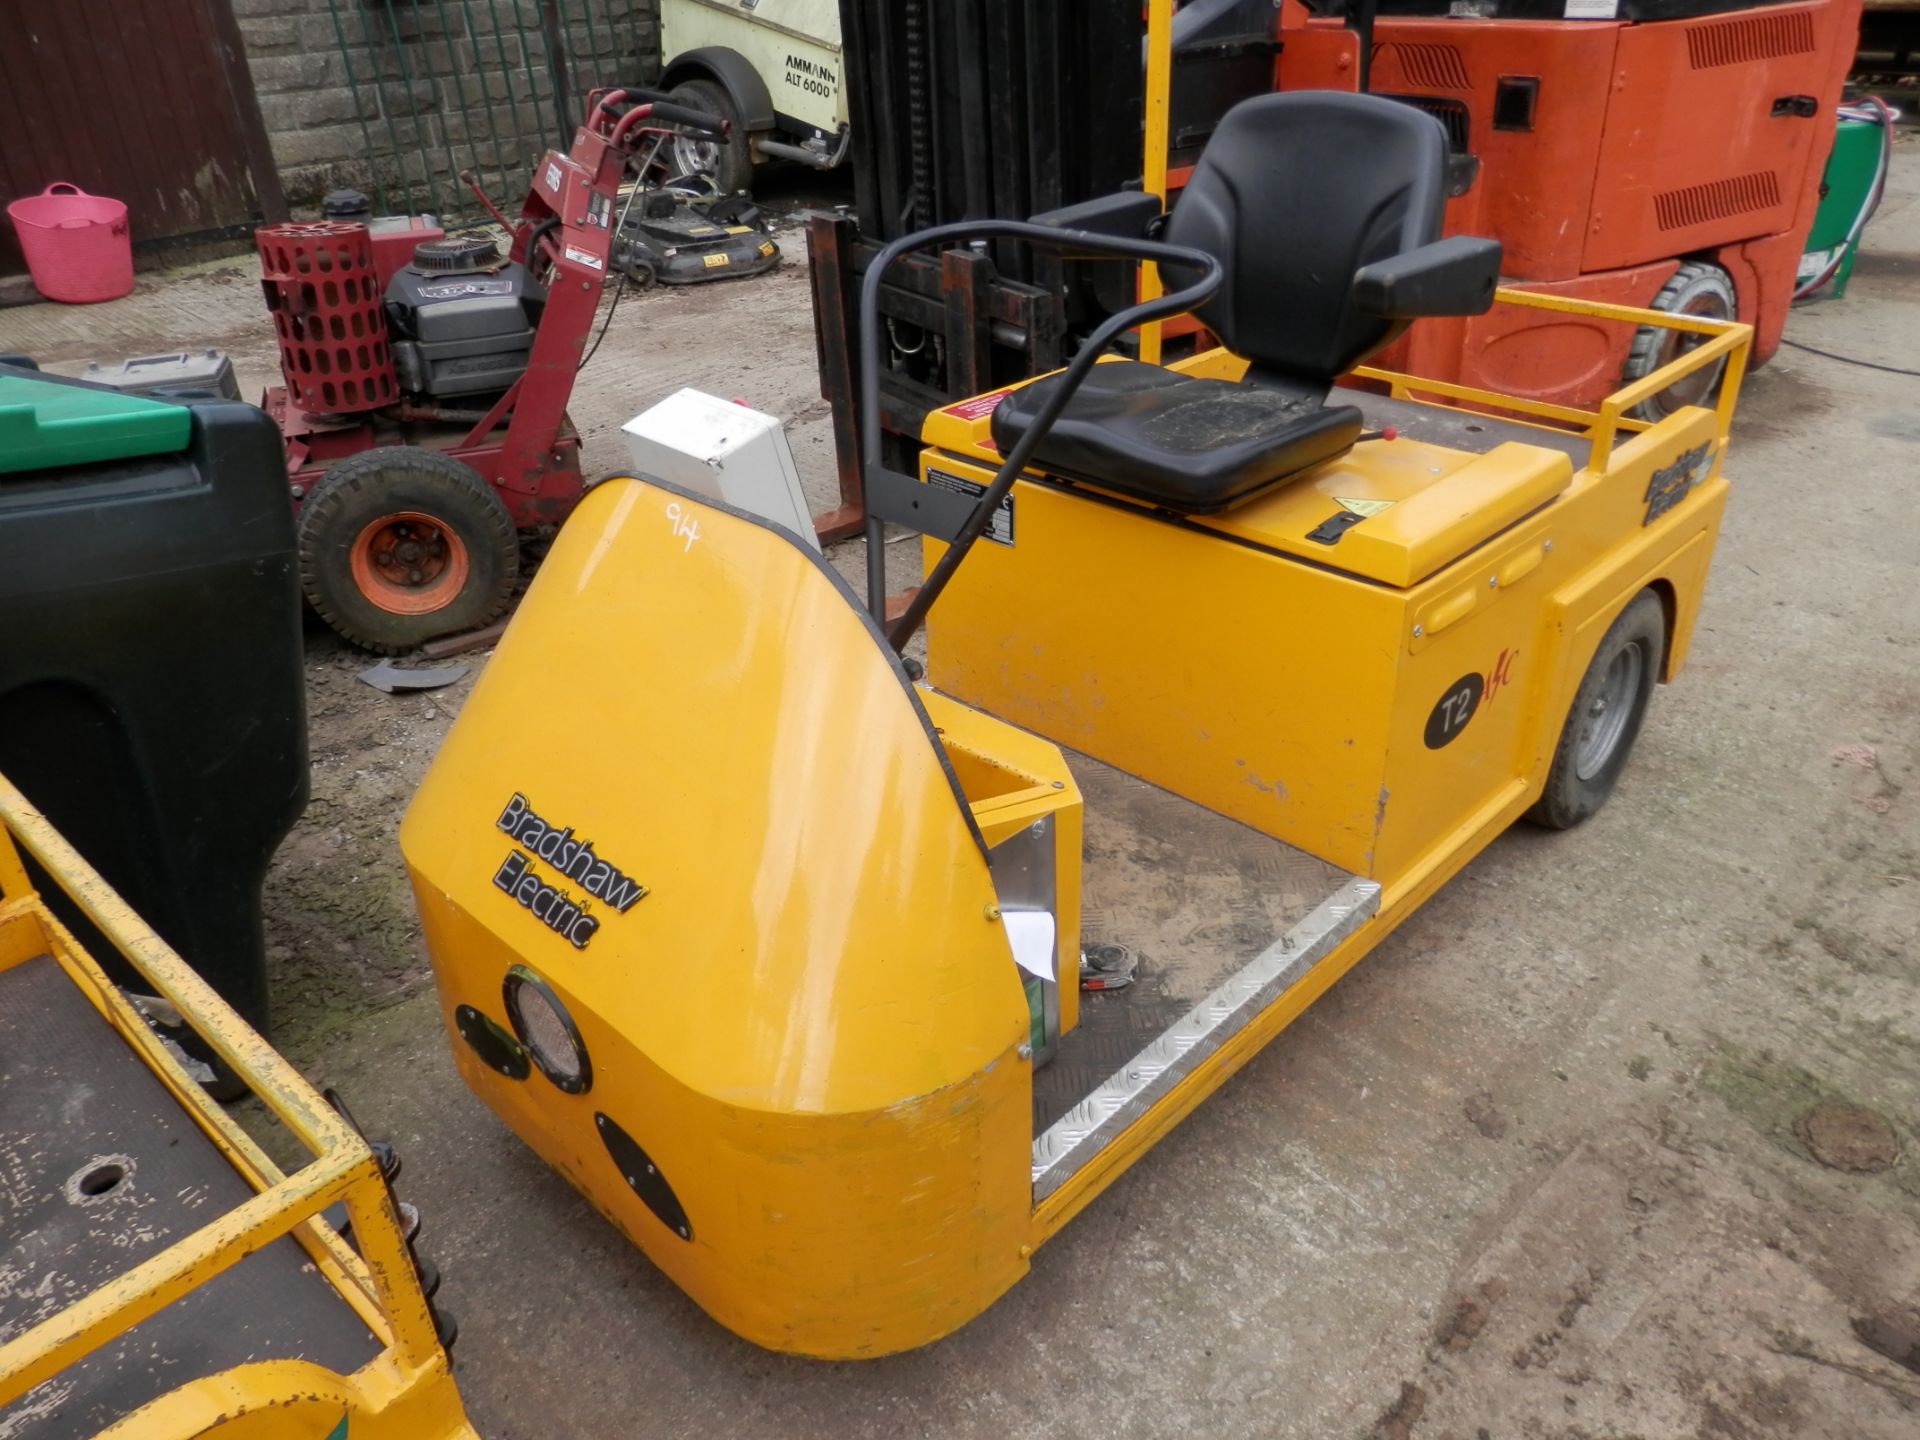 DS - 2011 BRADSHAW T2 ELECTRIC TUG/TOW TRACTOR, WORKING READY FOR USE. 1.5 TONNE TOW CAPACITY.